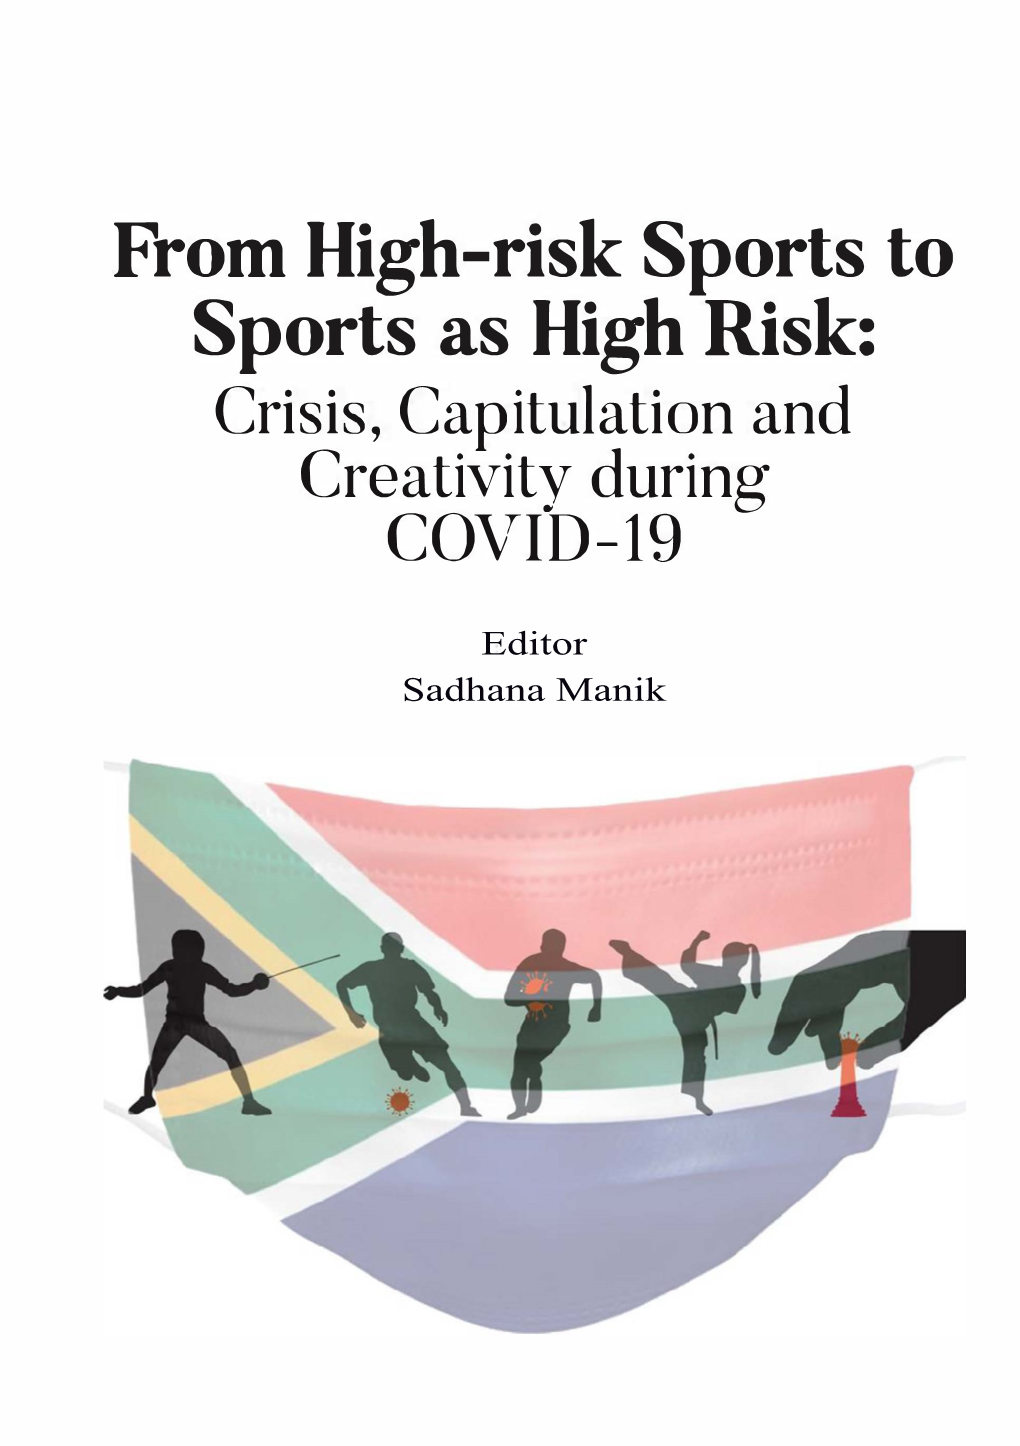 From High-Risk Sports to Sports As High Risk: Crisis, Capitulation and Creativity During COVID-19